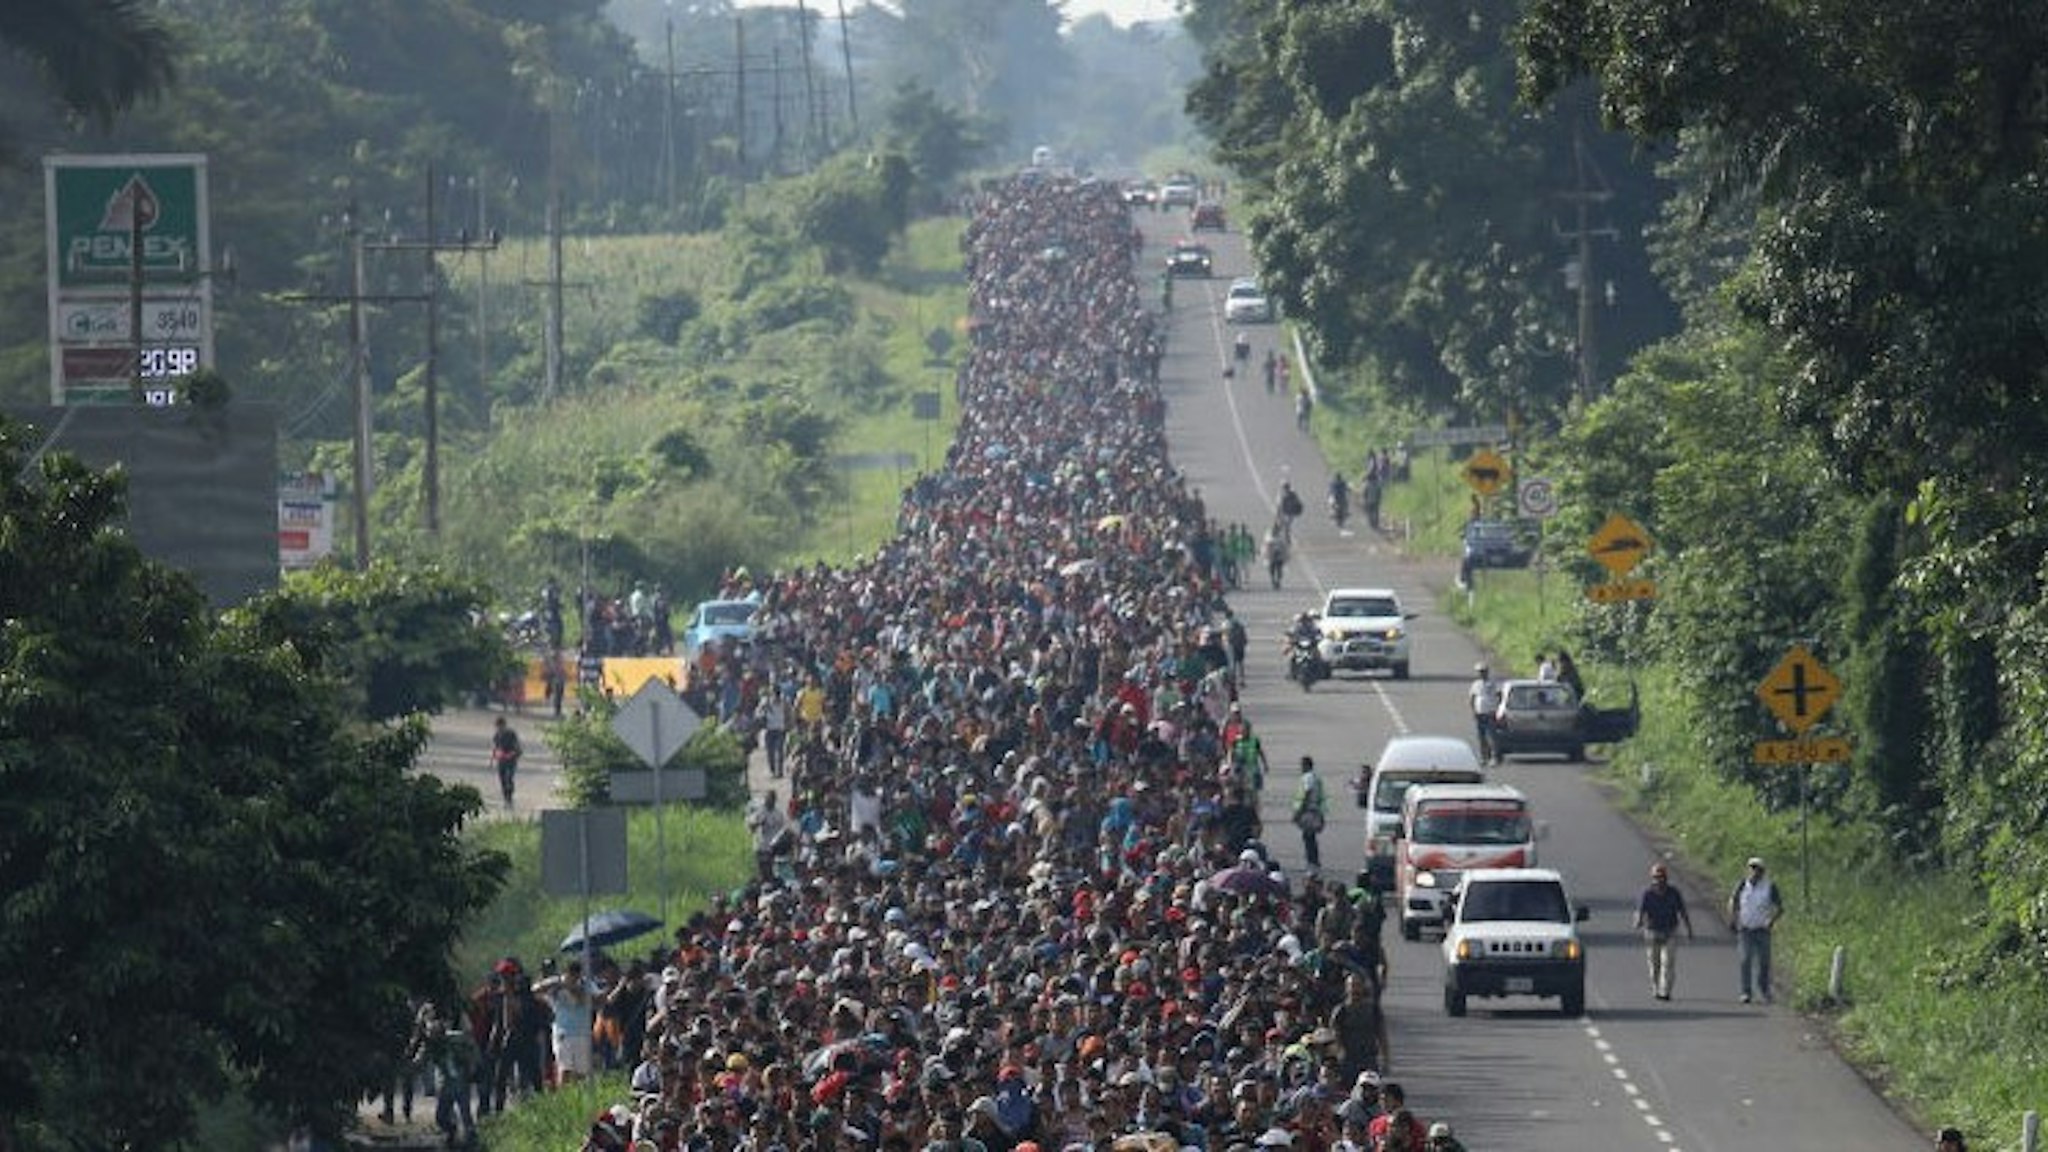 CIUDAD HIDALGO, MEXICO - OCTOBER 21: A migrant caravan walks into the interior of Mexico after crossing the Guatemalan border on October 21, 2018 near Ciudad Hidalgo, Mexico The caravan of Central Americans plans to eventually reach the United States. U.S. President Donald Trump has threatened to cancel the recent trade deal with Mexico and withhold aid to Central American countries if the caravan isn't stopped before reaching the U.S. (Photo by